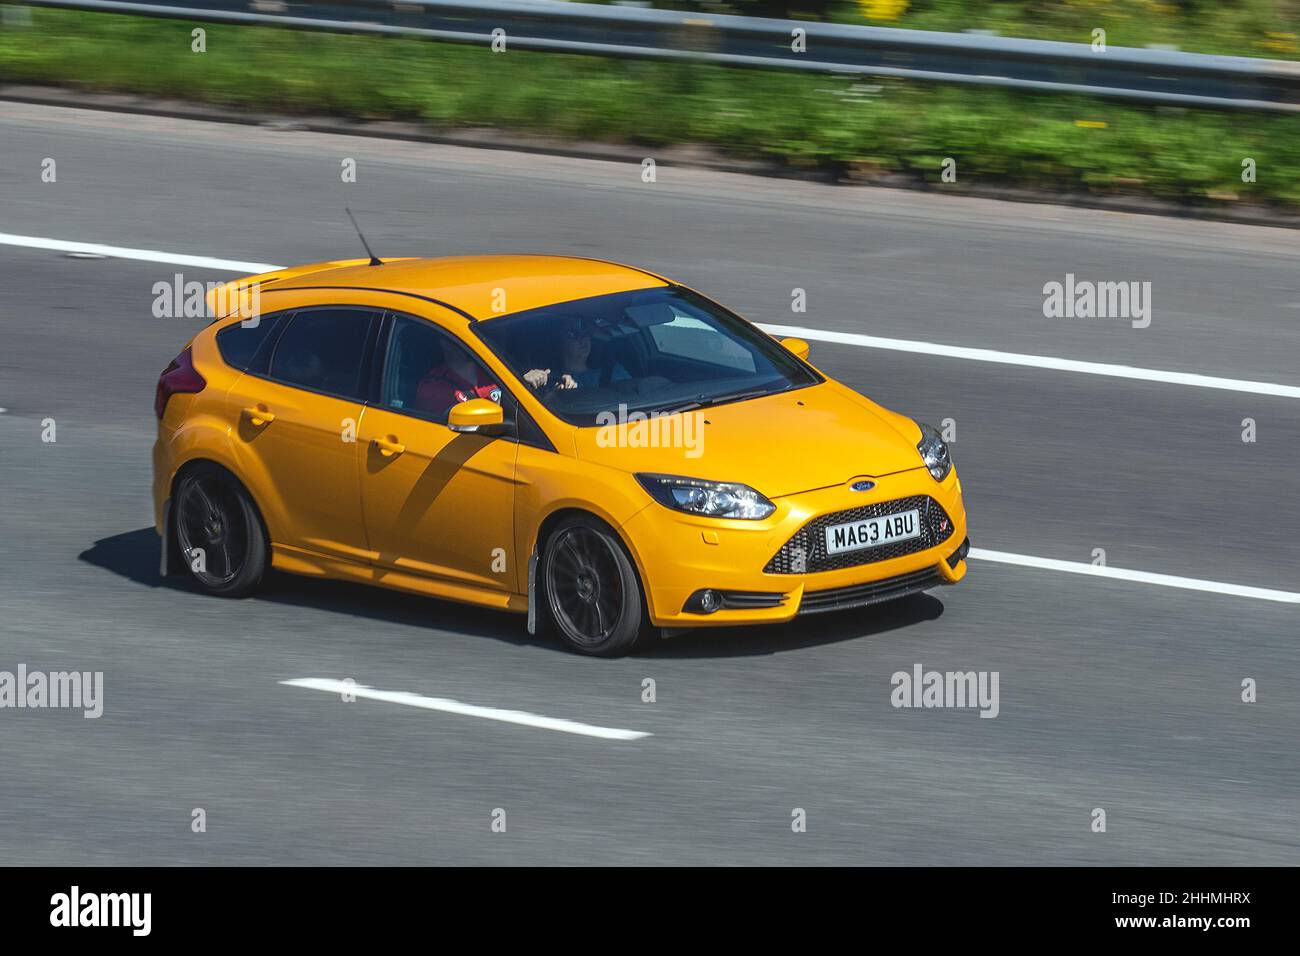 2013 Orange Ford Focus ST-2 1999cc 6-speed manual vehicular traffic, moving vehicles, petrol classic sports car, English, England, uk roads, motors, motoring, moving, cars driving vehicle, being driven, transport, travel, cars driving vehicle in motion, UK Stock Photo